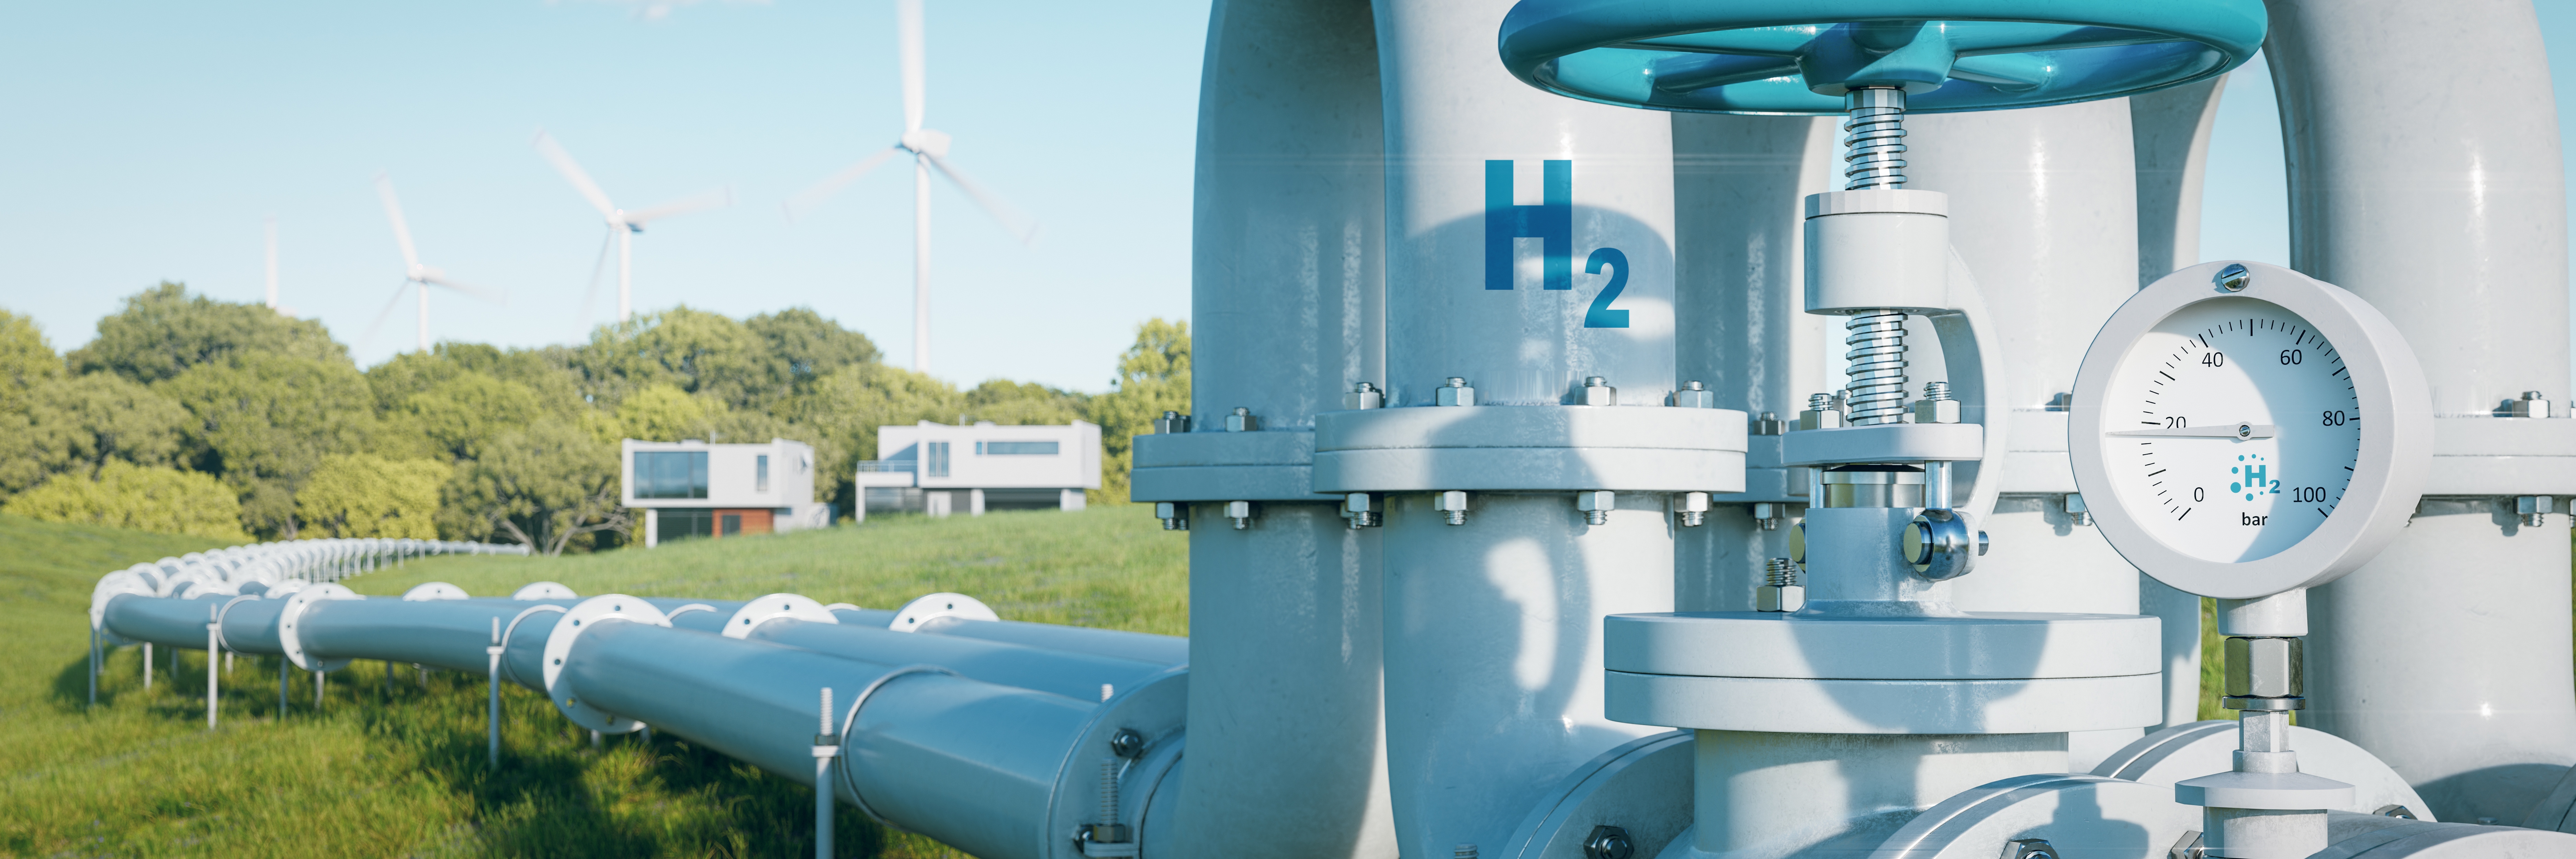 Green hydrogen offers insurers growth potential